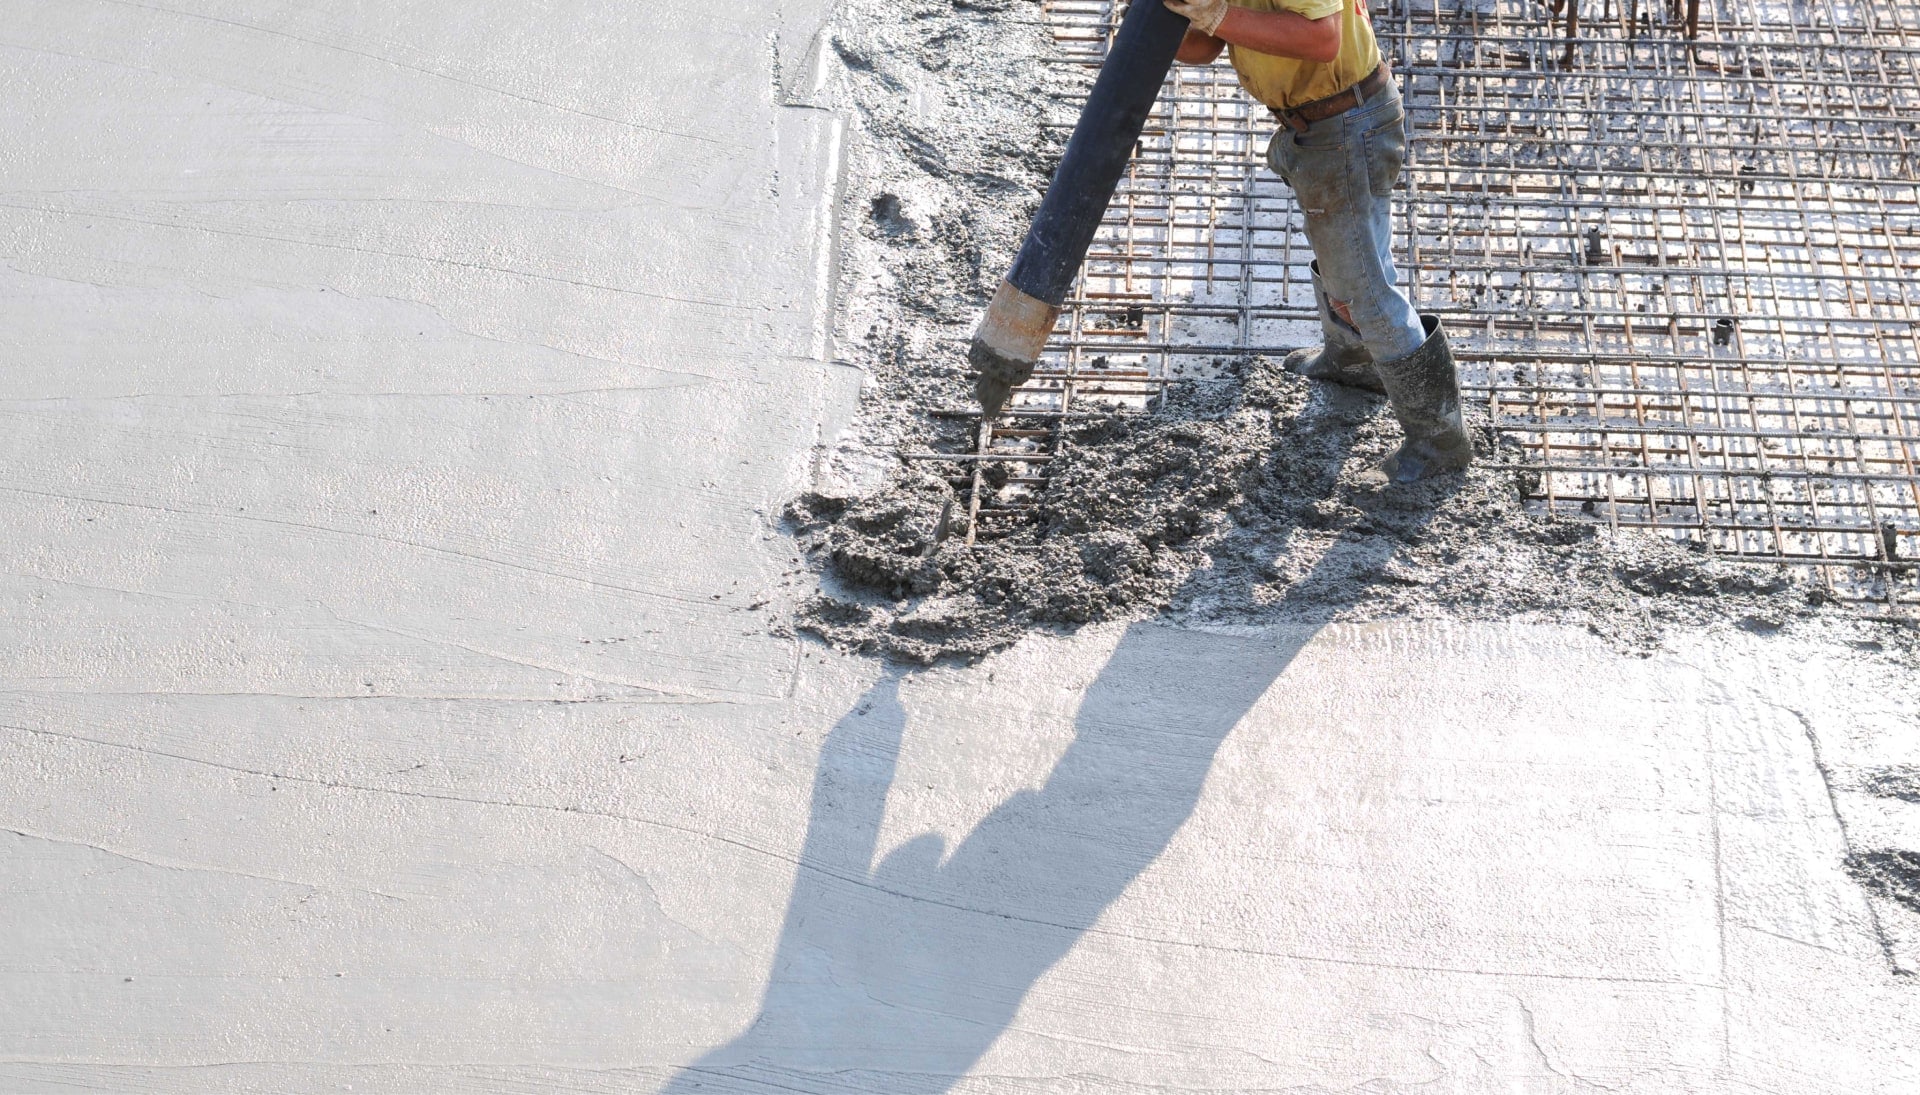 High-Quality Concrete Foundation Services Lakeland Trust Experienced Contractors for Strong Concrete Foundations for Residential or Commercial Projects.